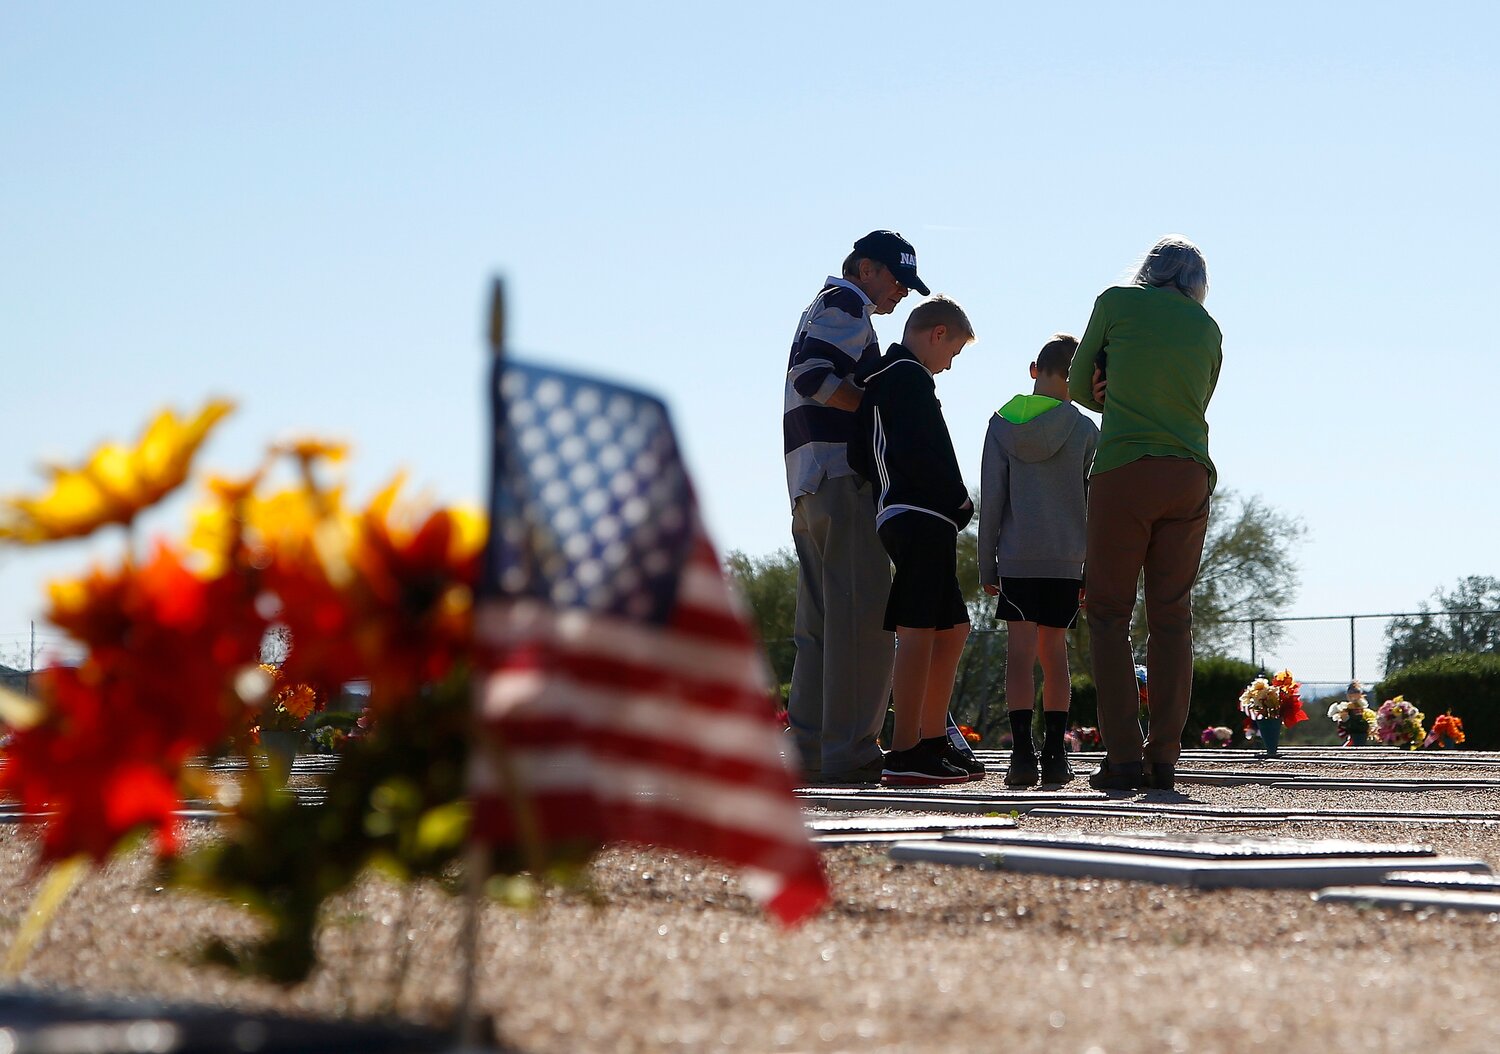 Visitors pay their respects at the National Memorial Cemetery of Arizona in Phoenix in this 2018 file photo.